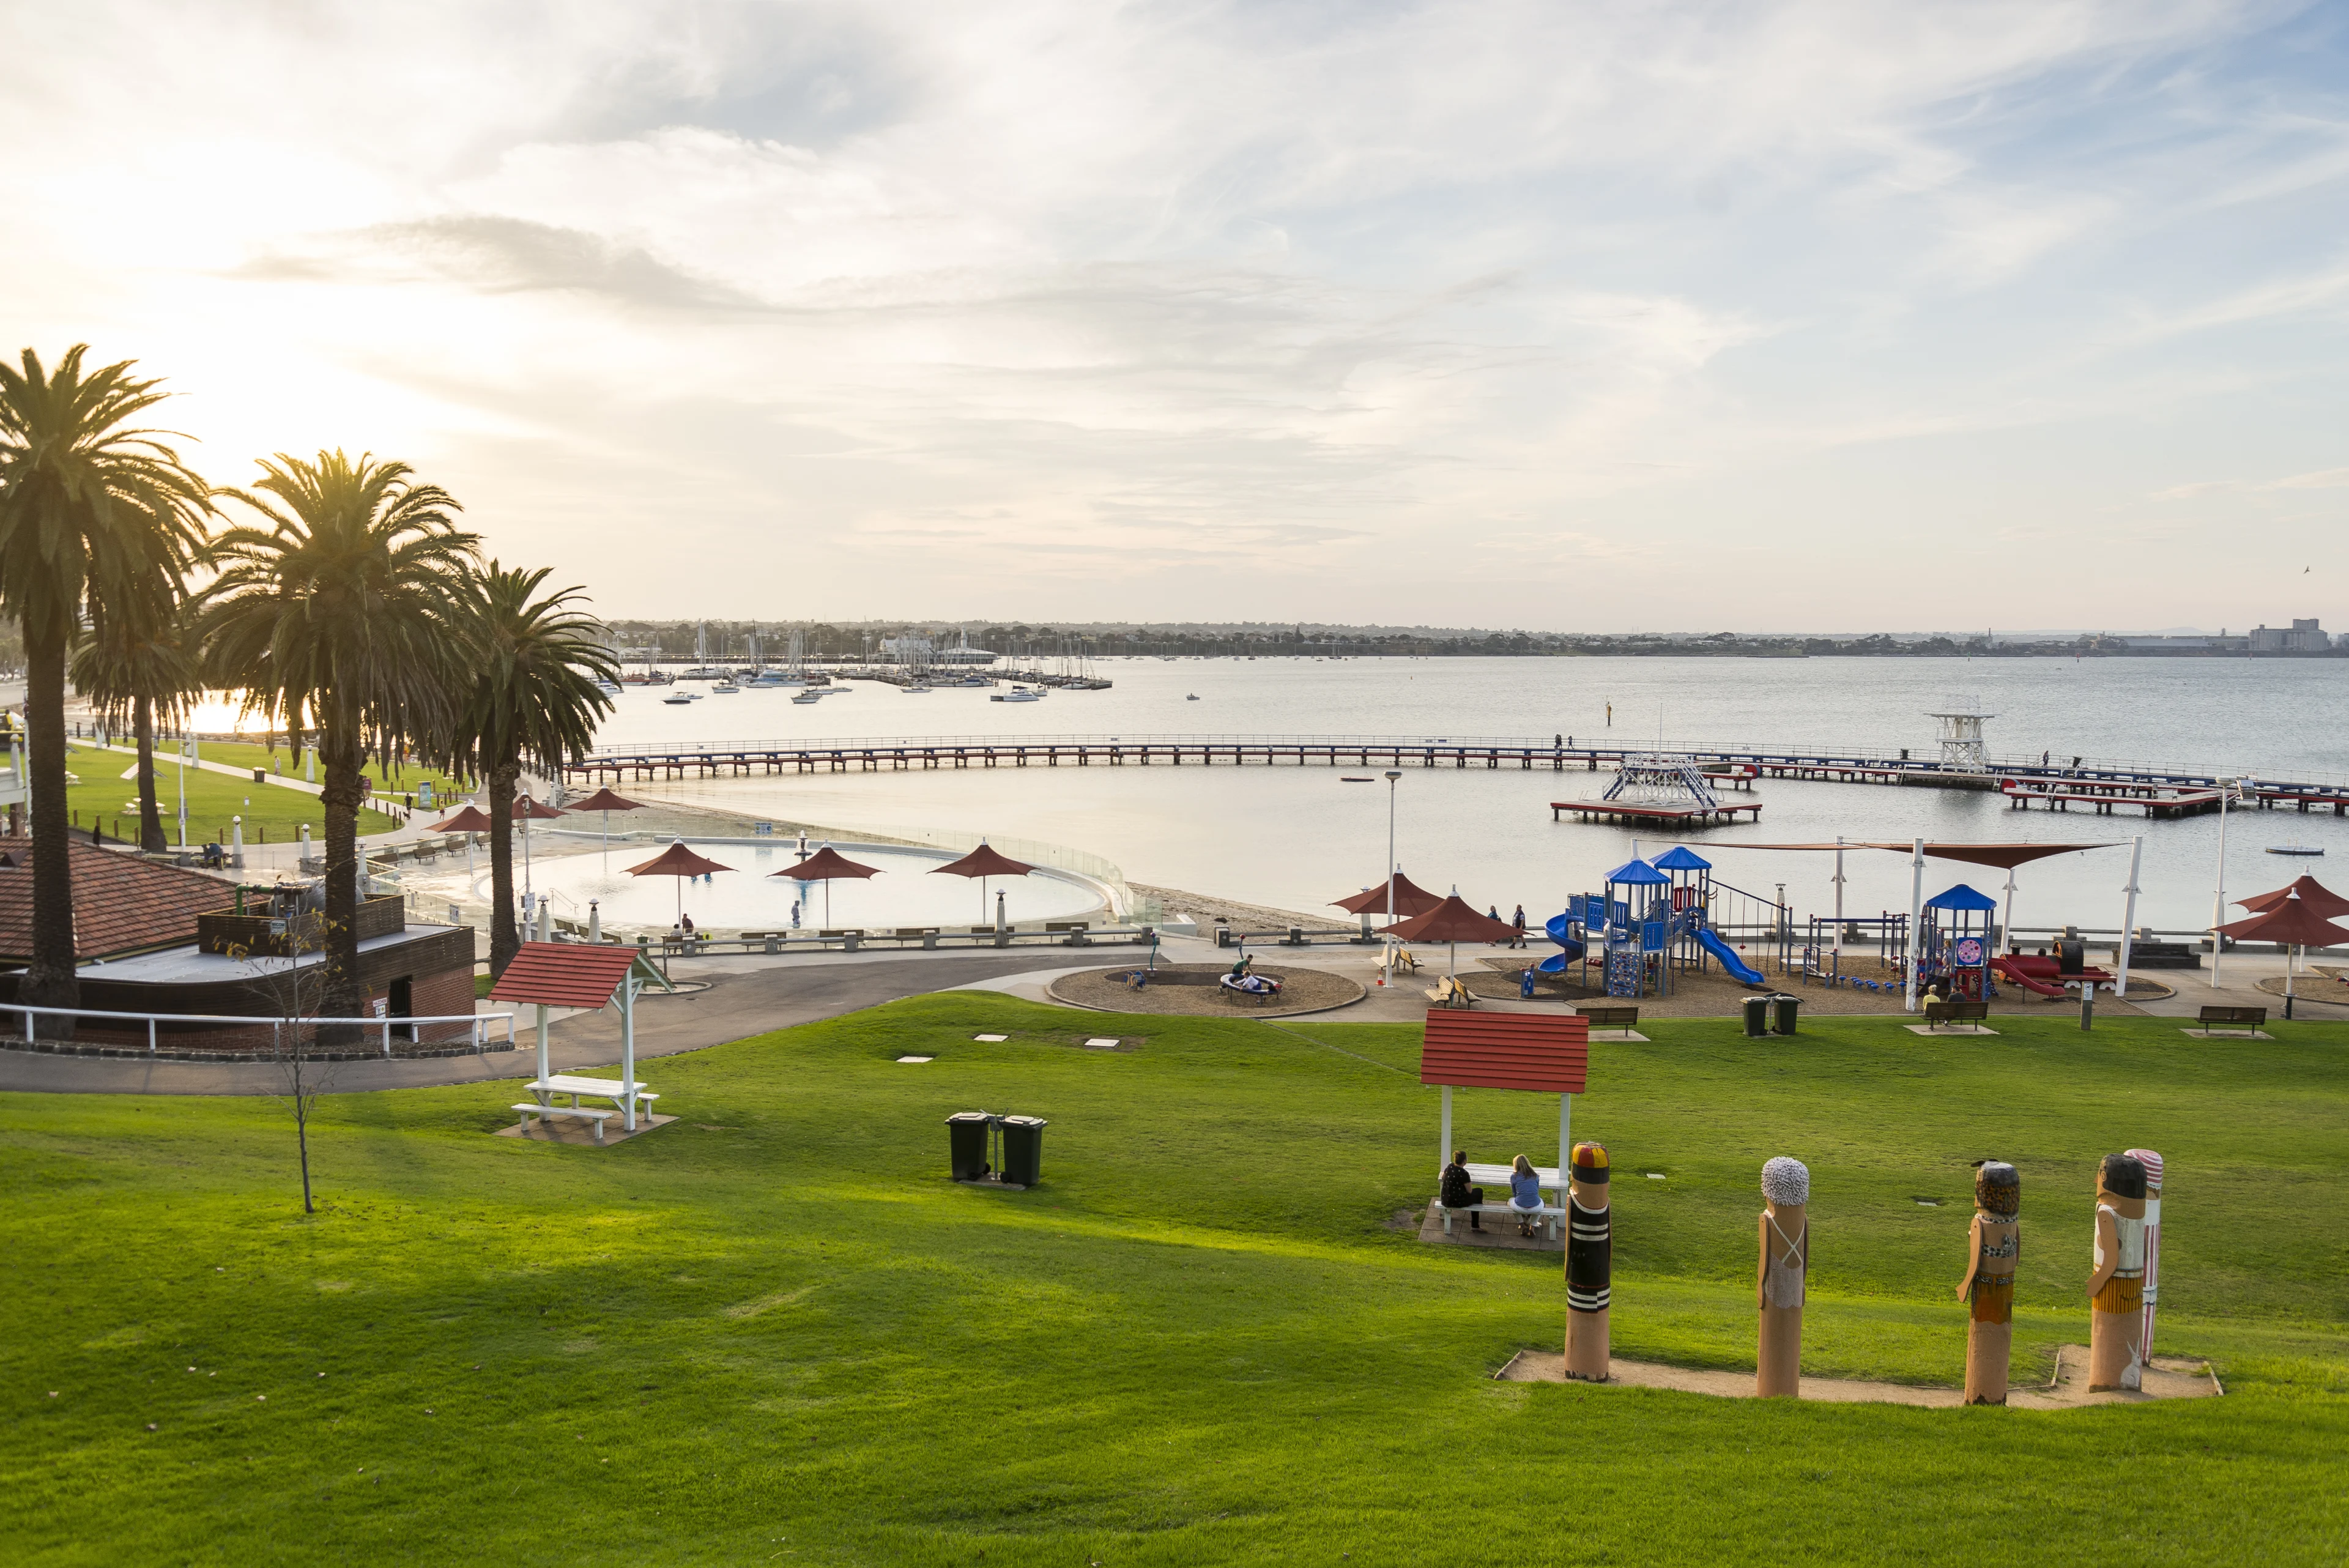 Foreshore at Eastern Beach Geelong with the sea baths in view and a section of the children's pool.